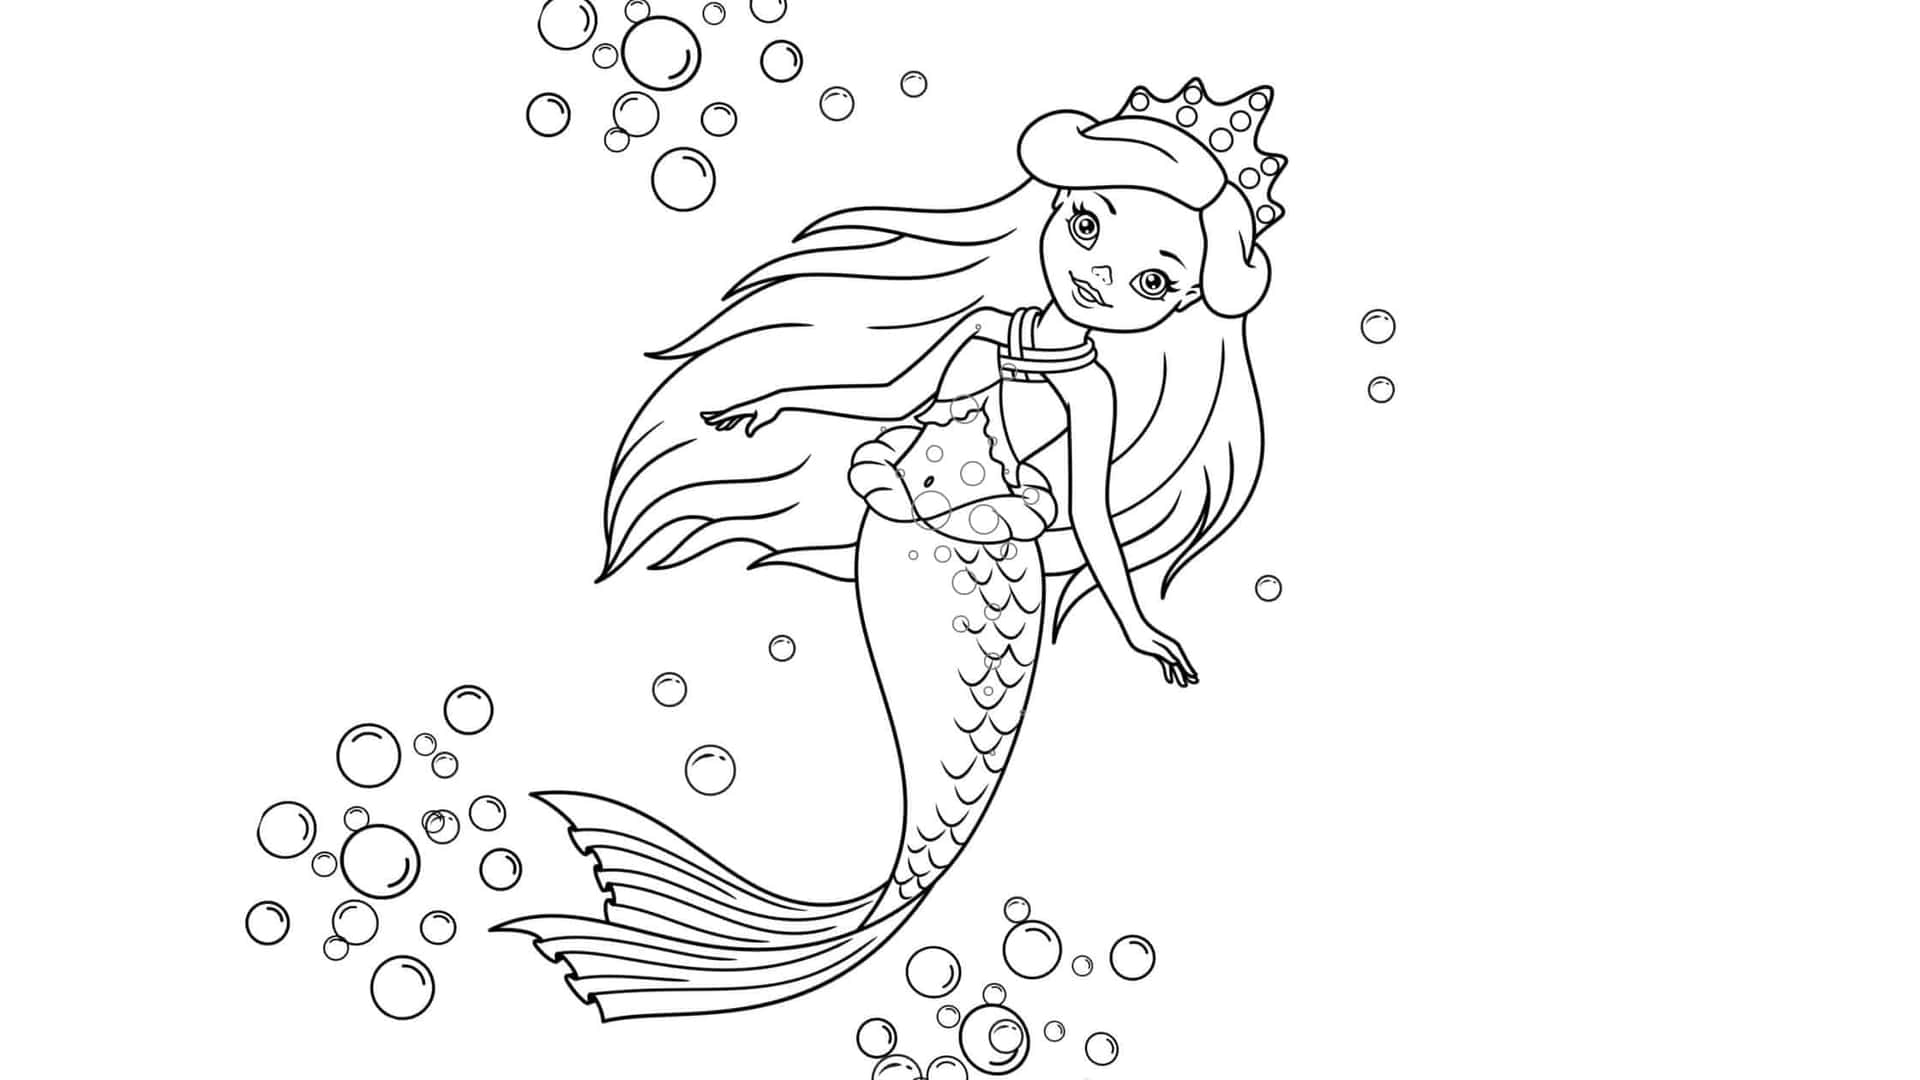 Create Your Own Underwater Adventure with Mermaid Coloring Pictures